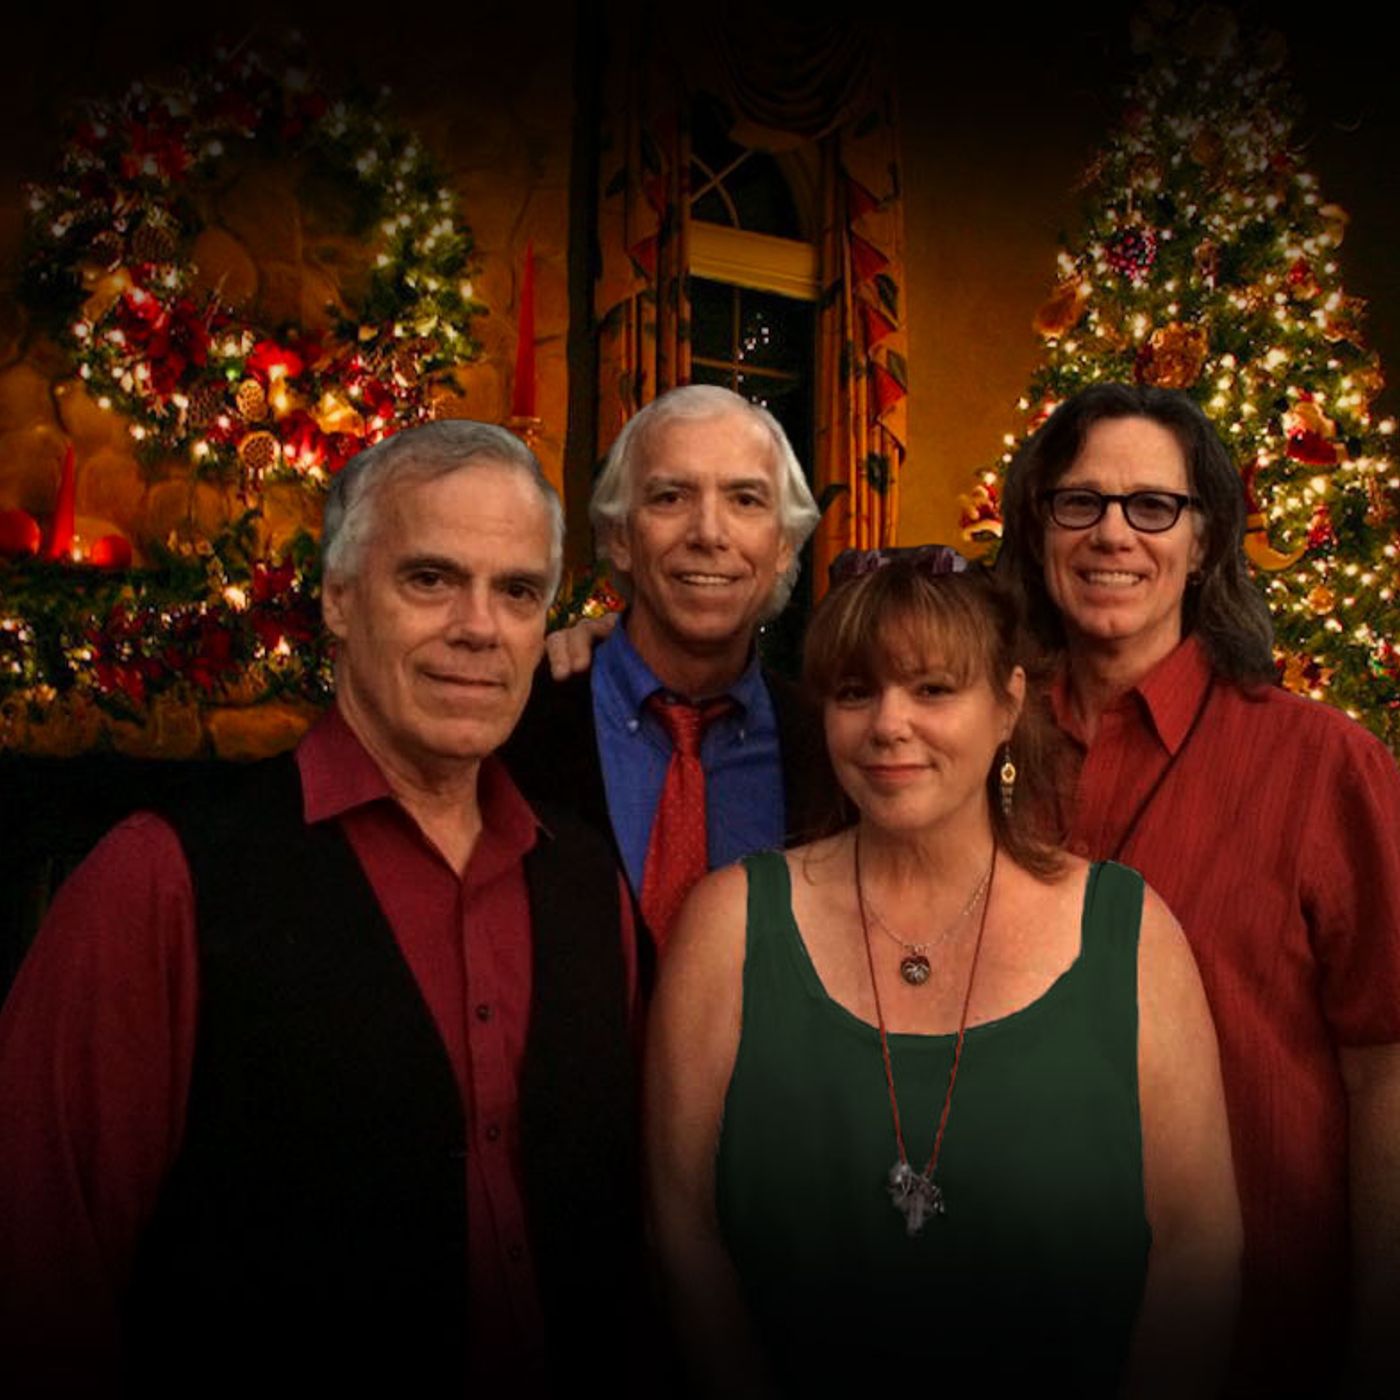 423 - Susan Cowsill - A Christmas Offering From the Cowsills